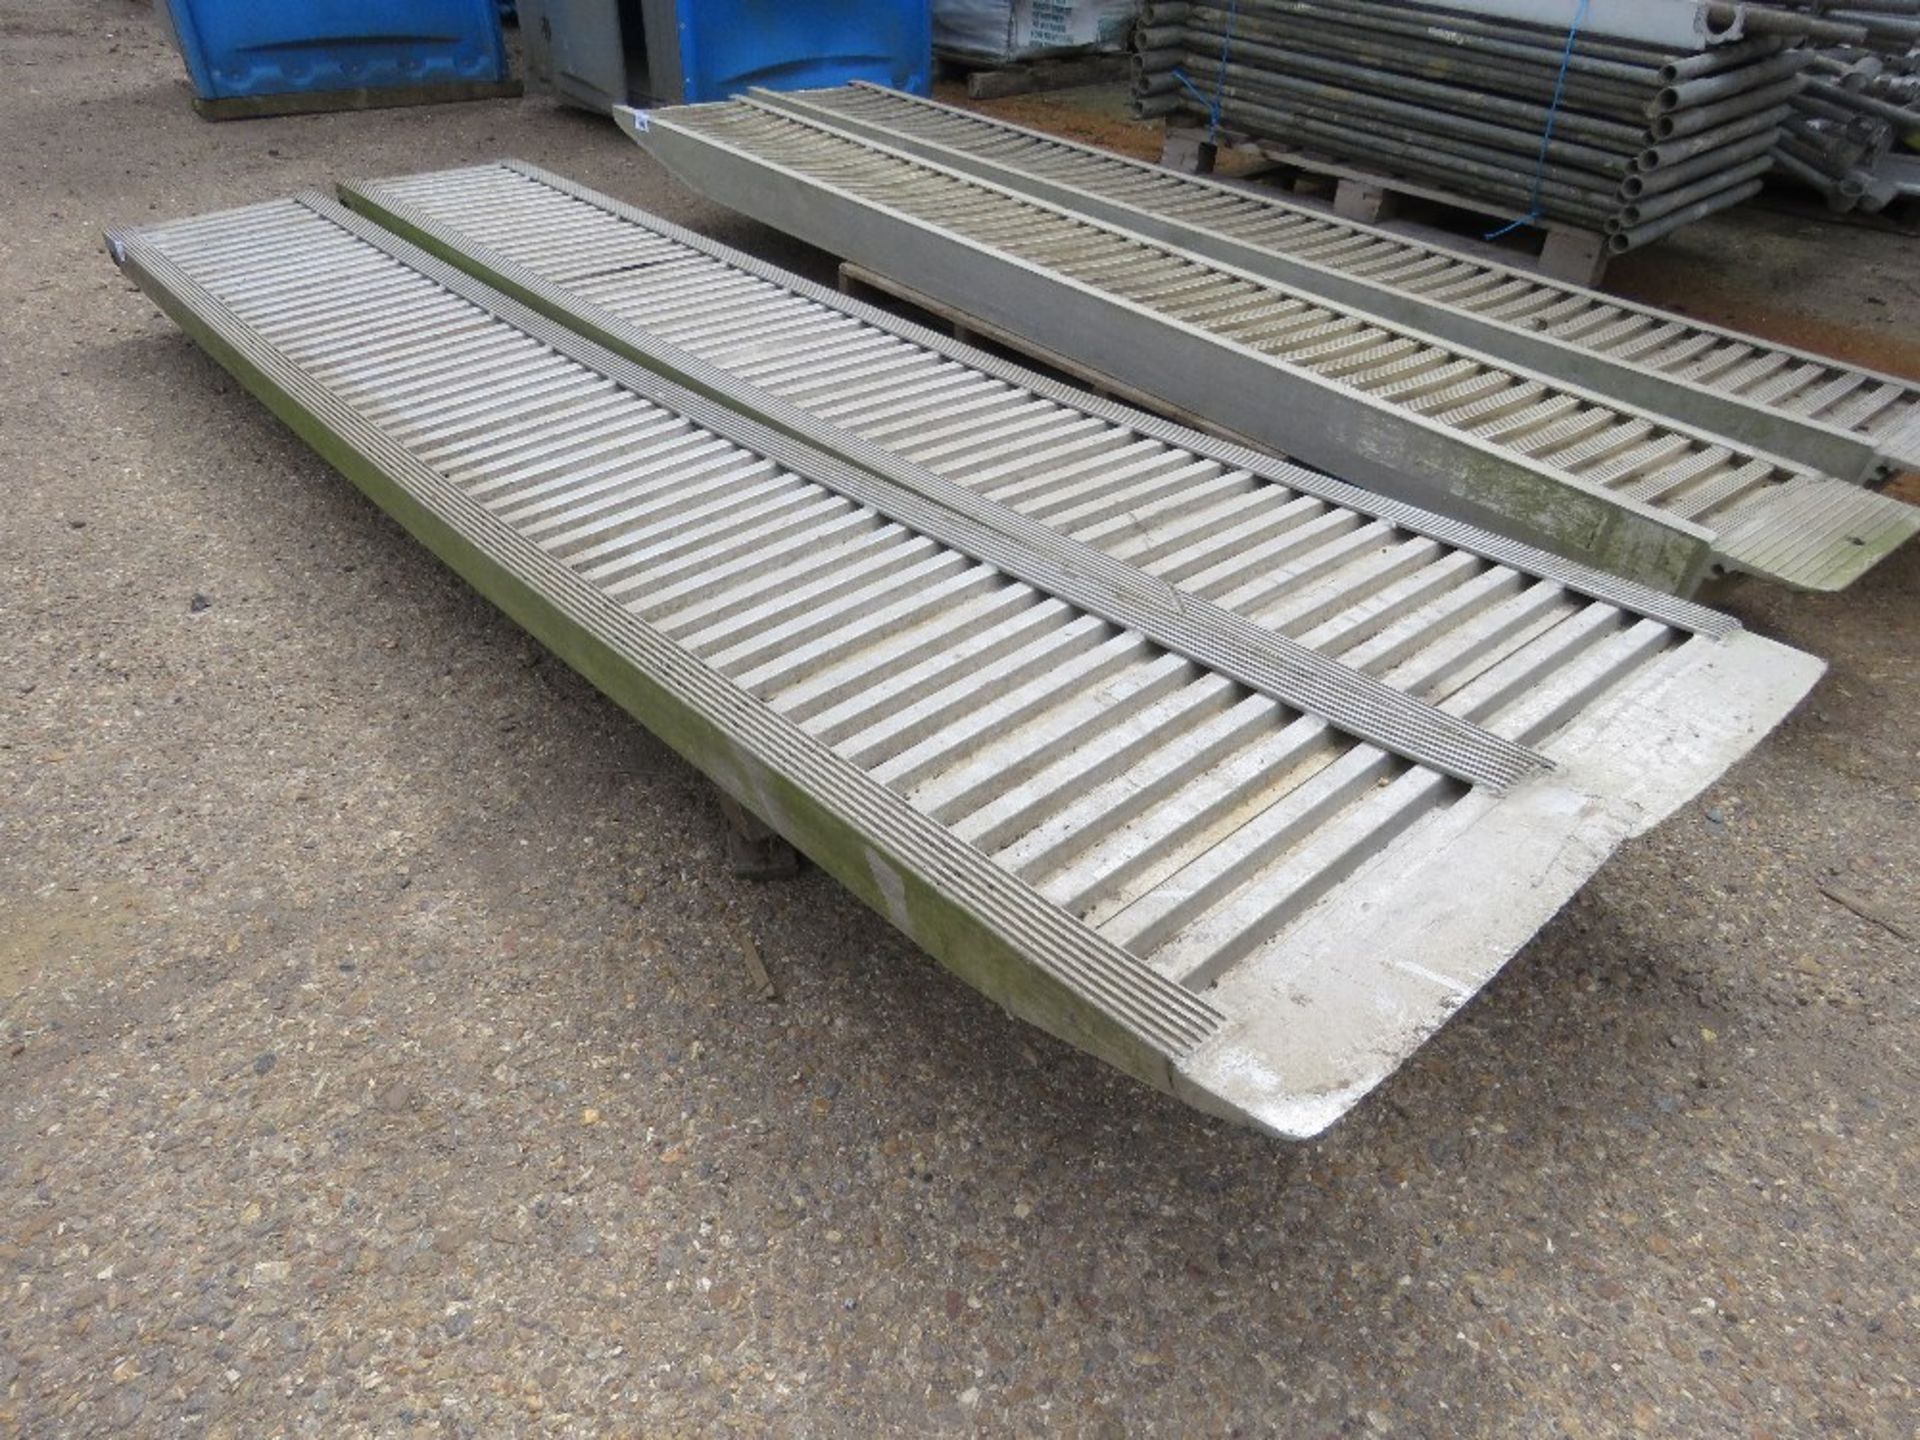 LARGE PAIR OF ALUMINIUM LOADING RAMPS 10FT LENGTH APPROX X 18" WIDTH APPROX. - Image 3 of 5